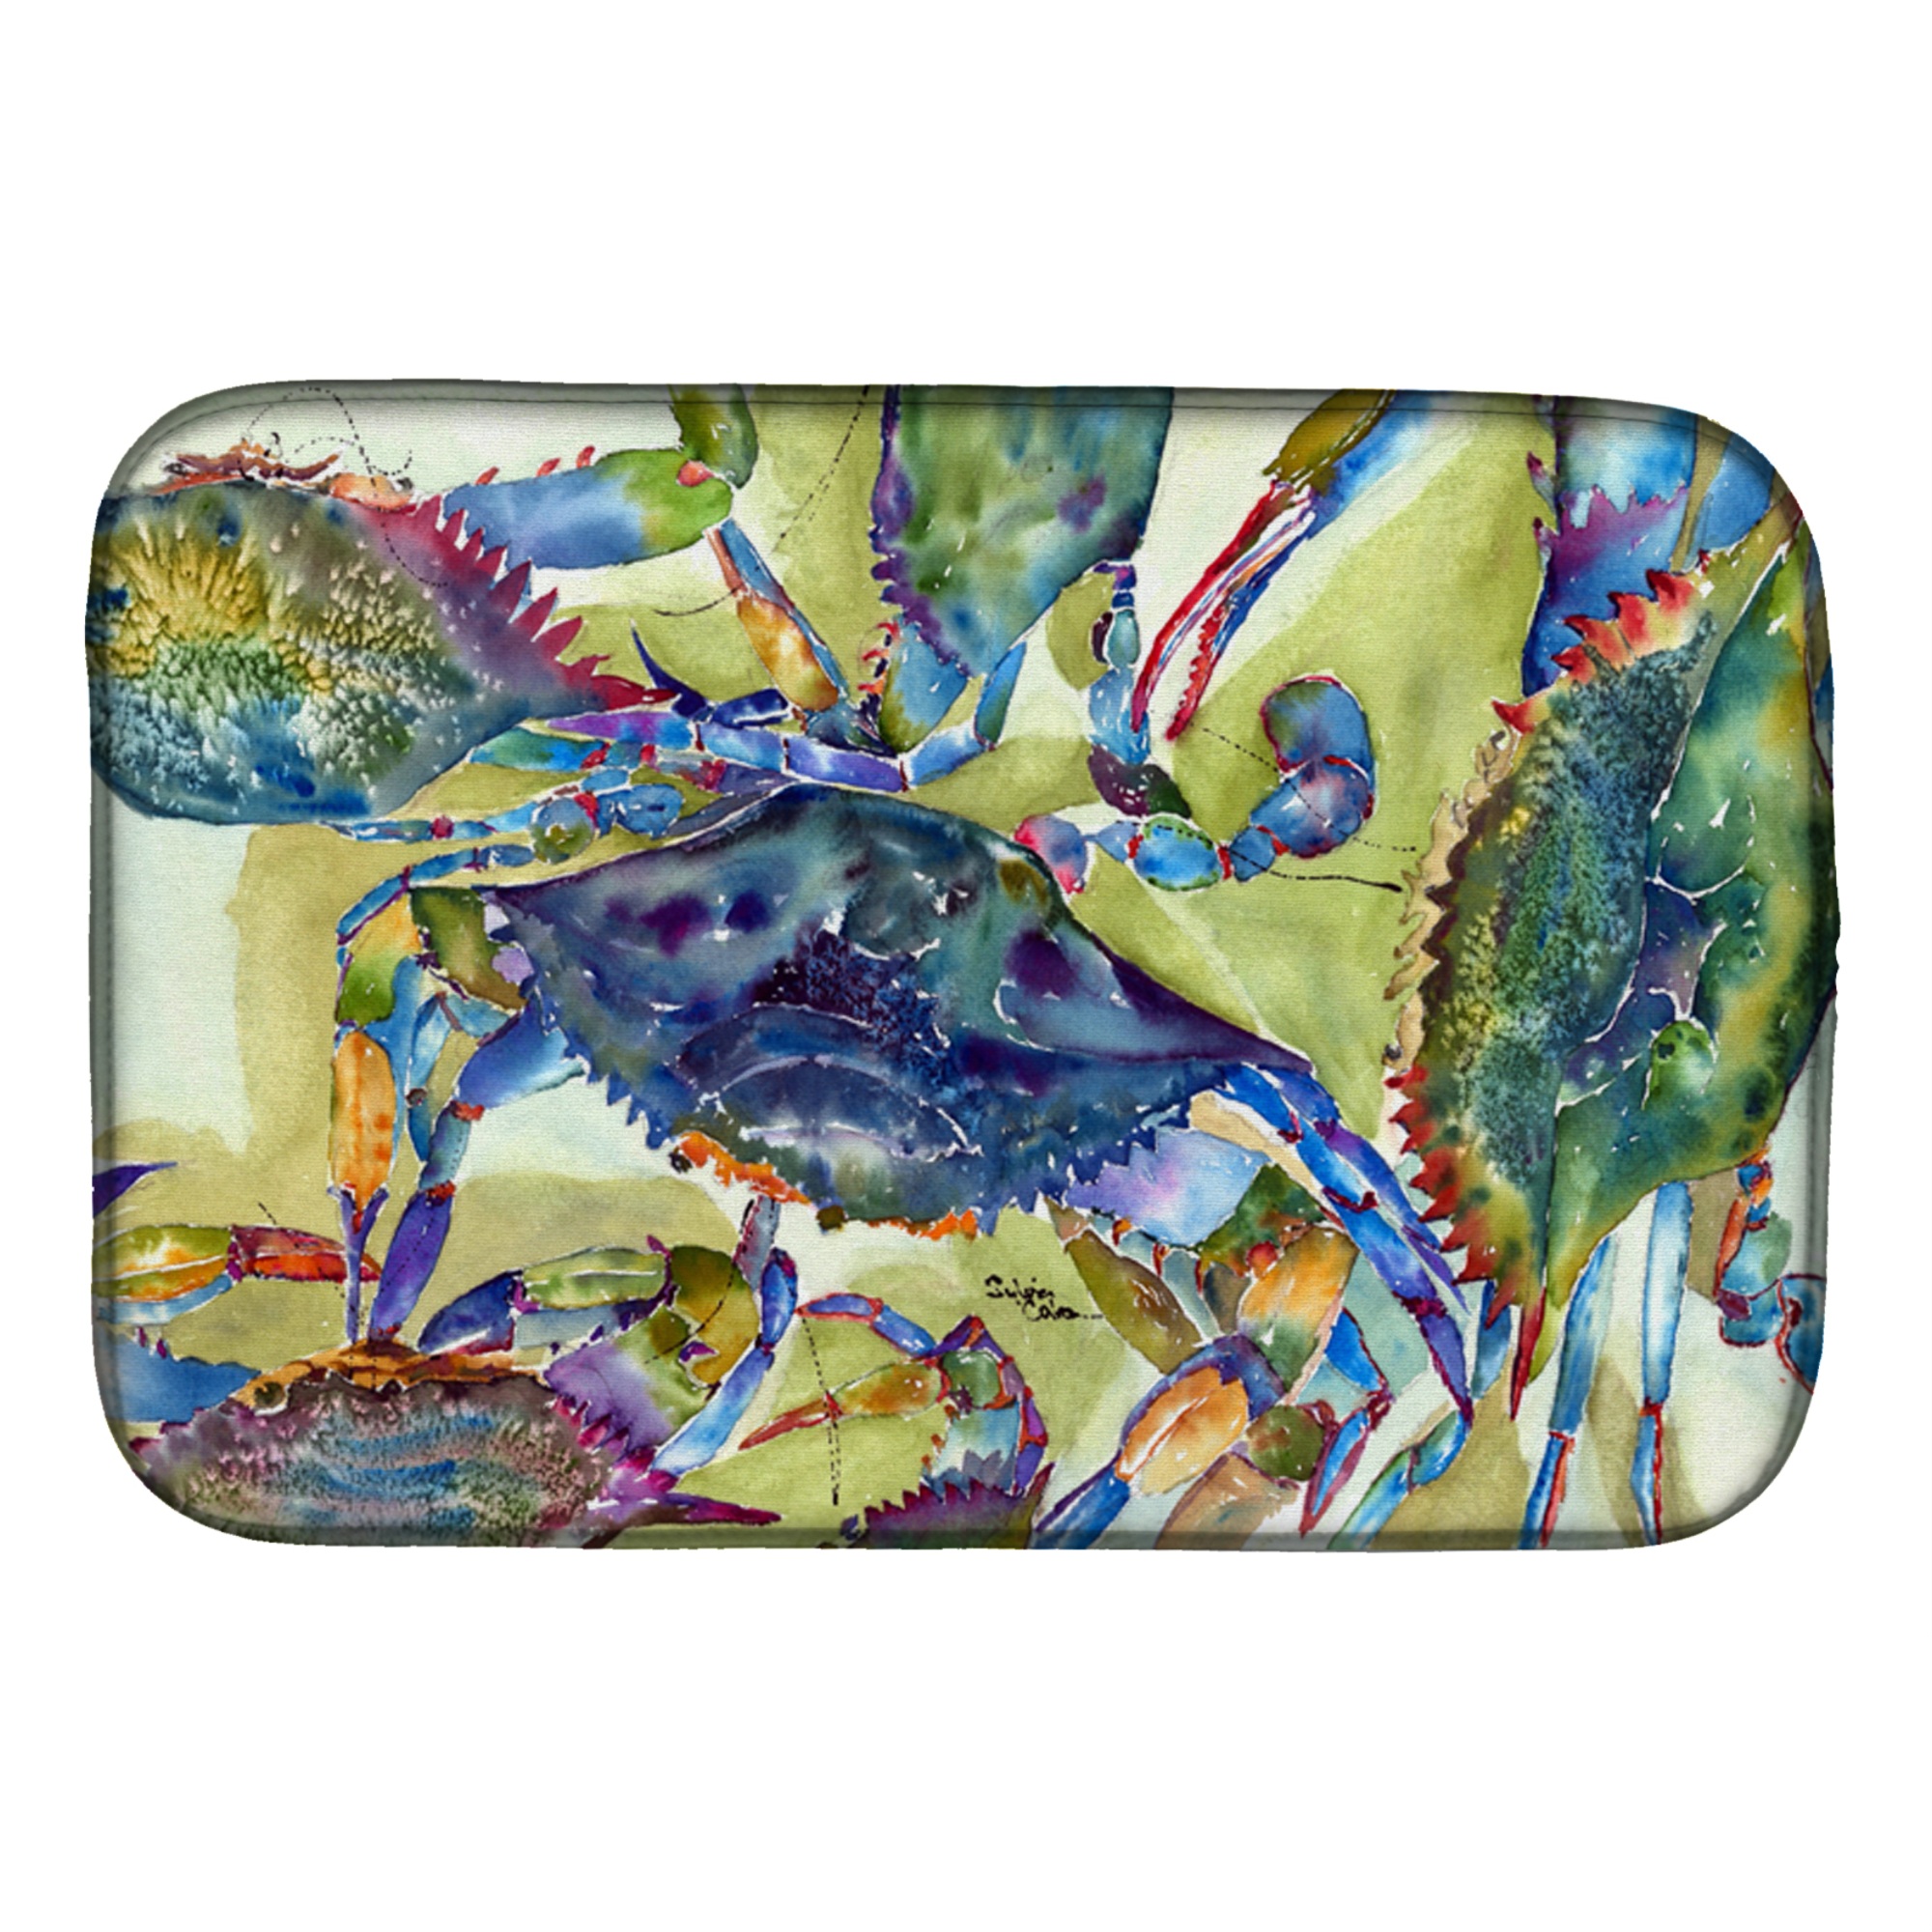 Caroline's Treasures "Caroline's Treasures Crab All Over Dish Drying Mat, 14"" x 21"", Multicolor"